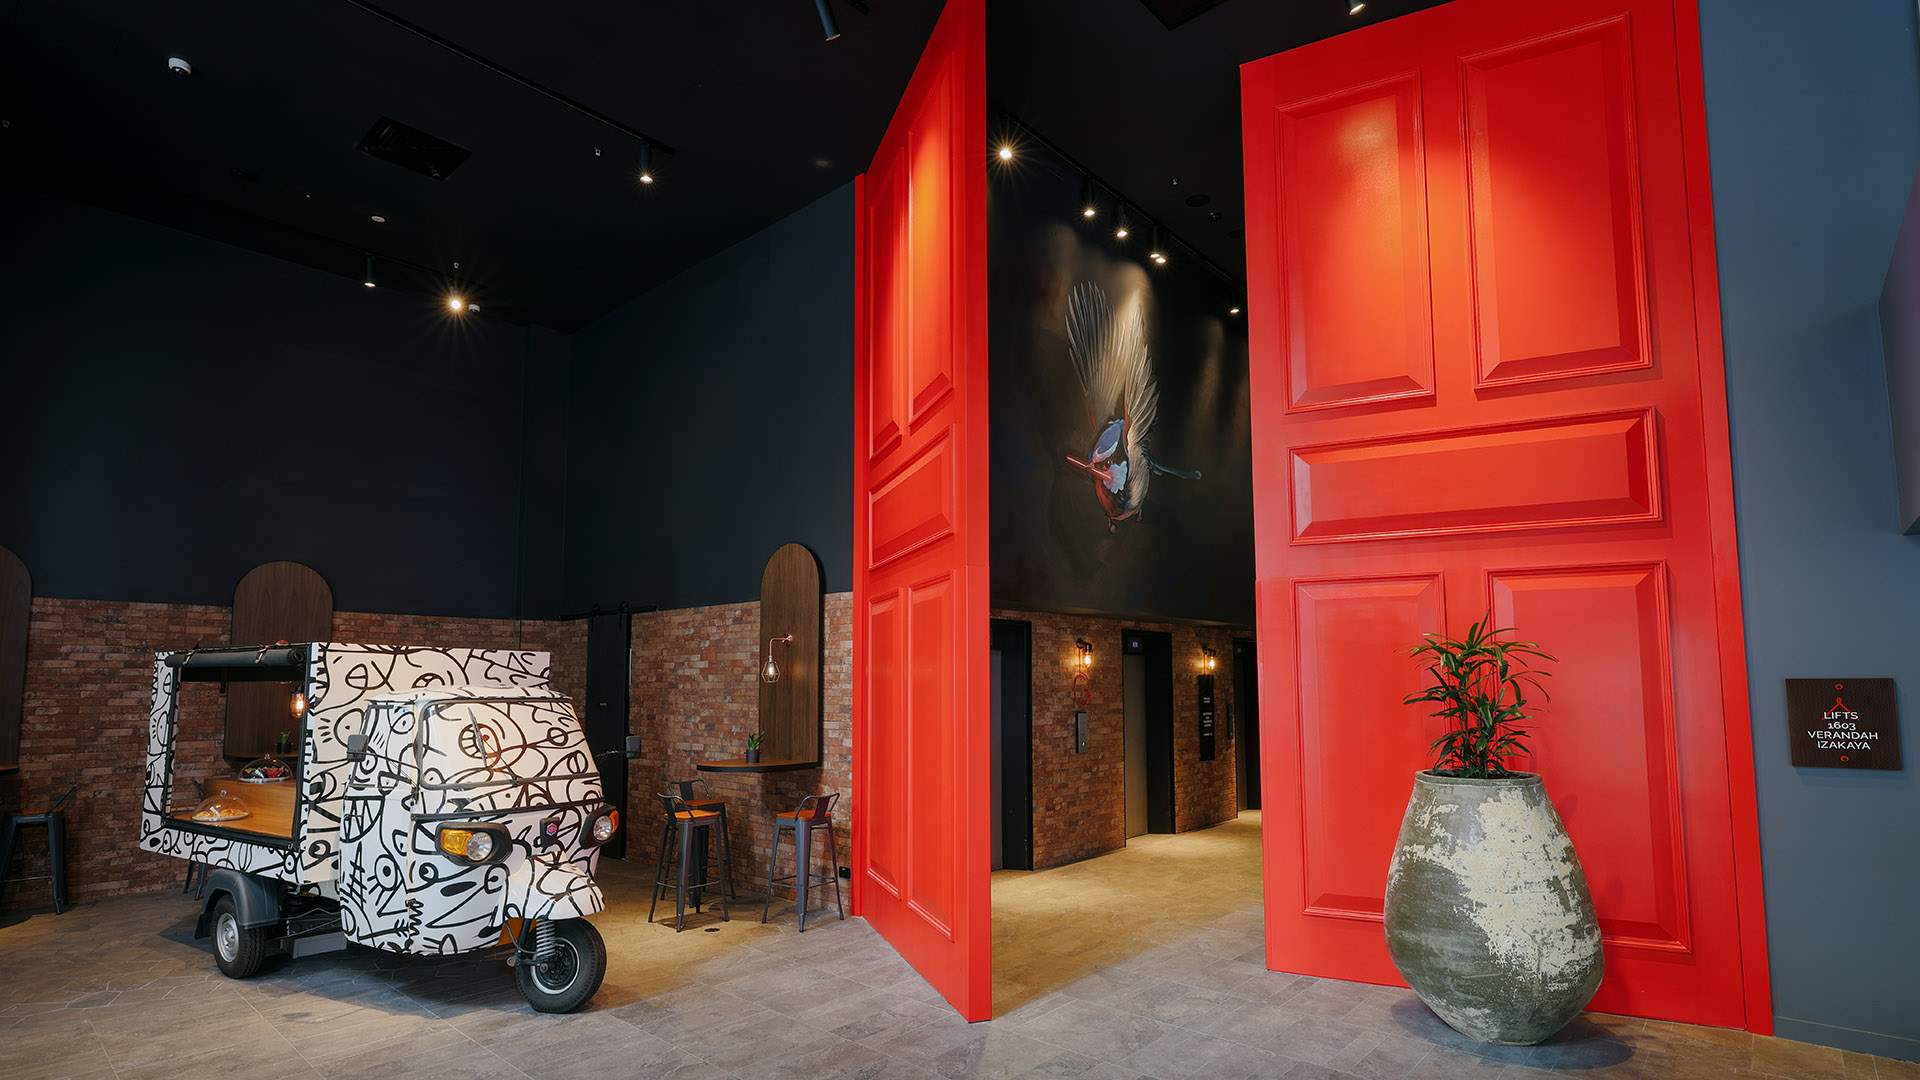 Brisbane's First Hotel Indigo Boasts a Japanese Eatery and 'Boy Swallows Universe'-Inspired Mural